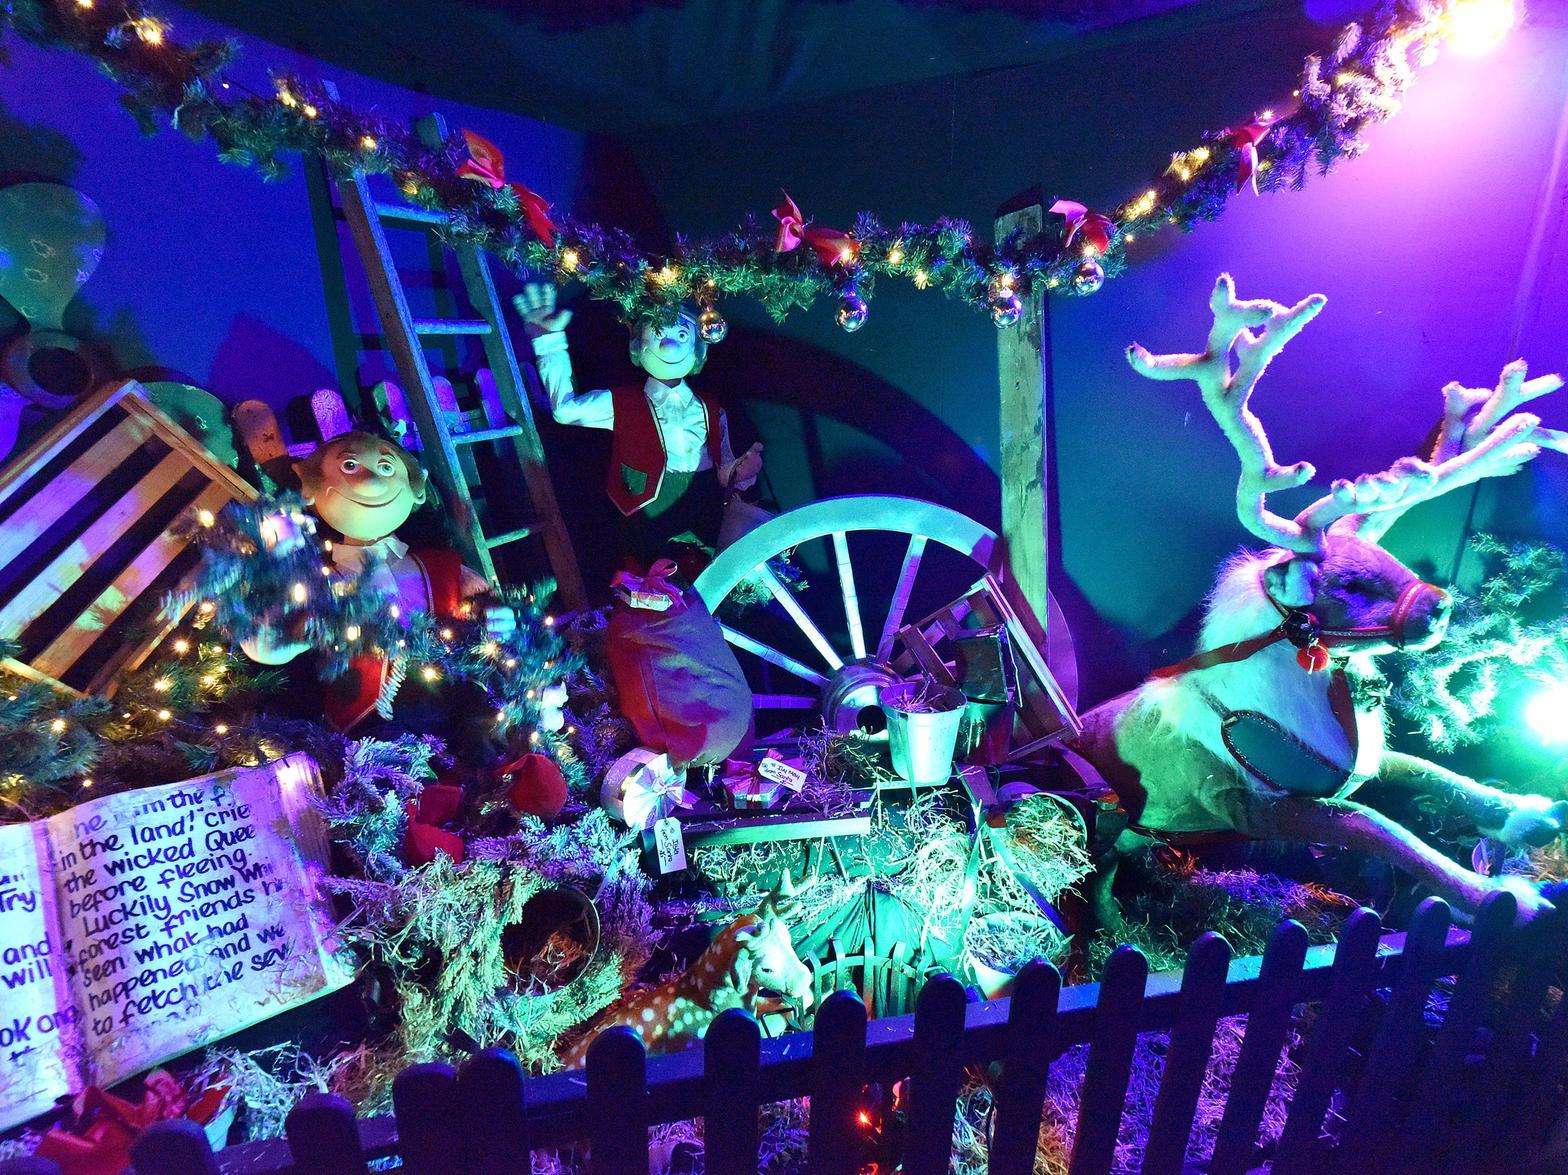 This year a festive take on Treasure Island is on view.